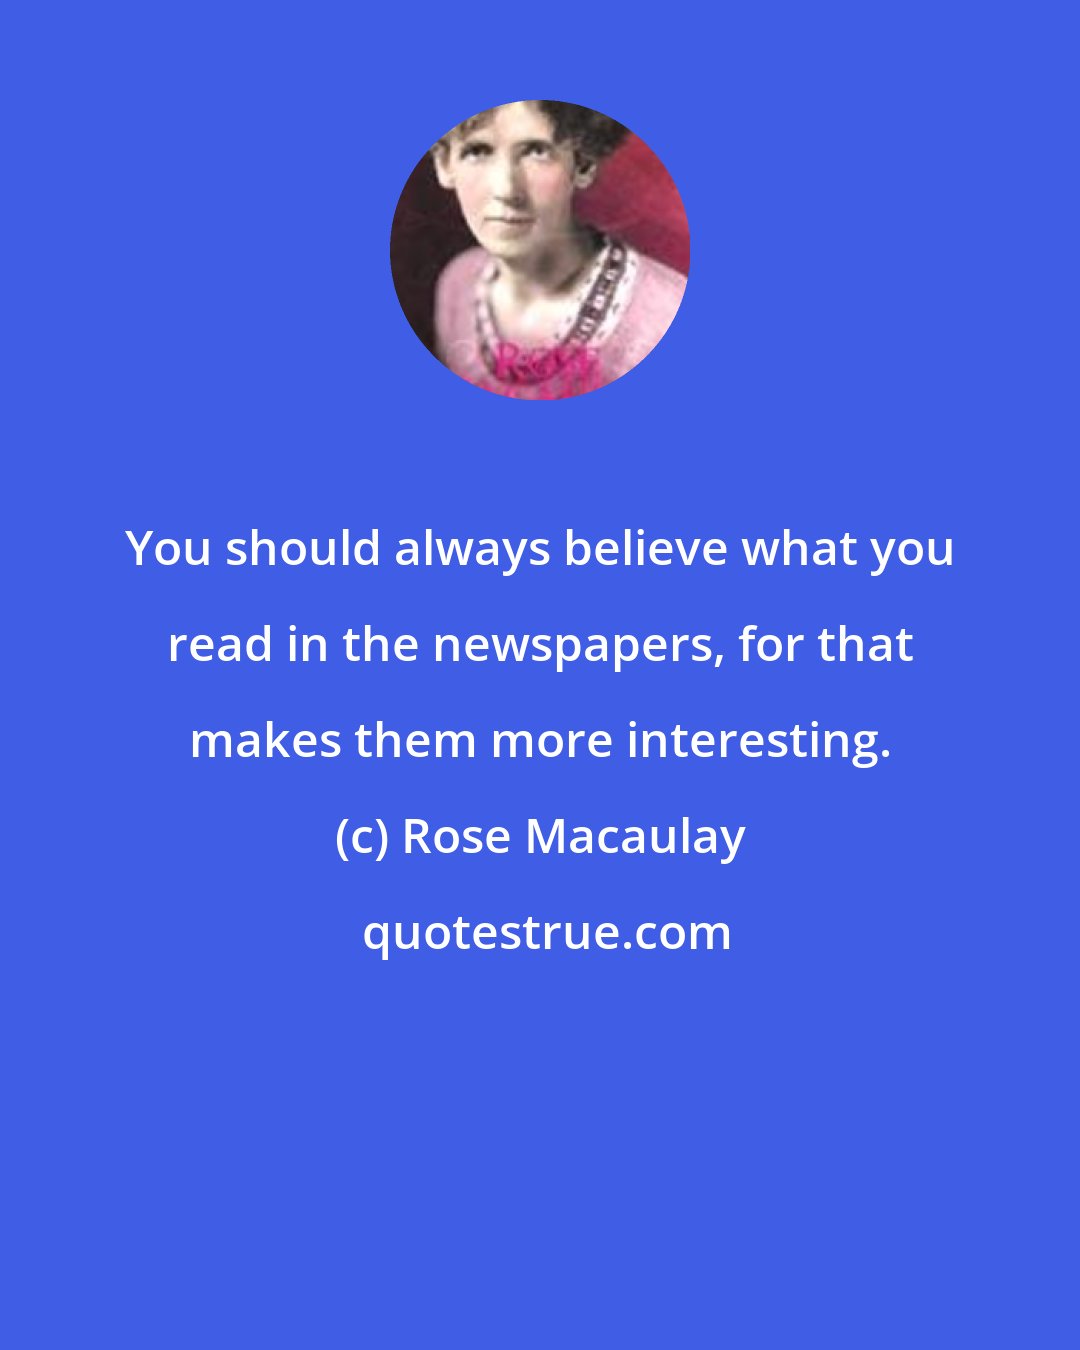 Rose Macaulay: You should always believe what you read in the newspapers, for that makes them more interesting.